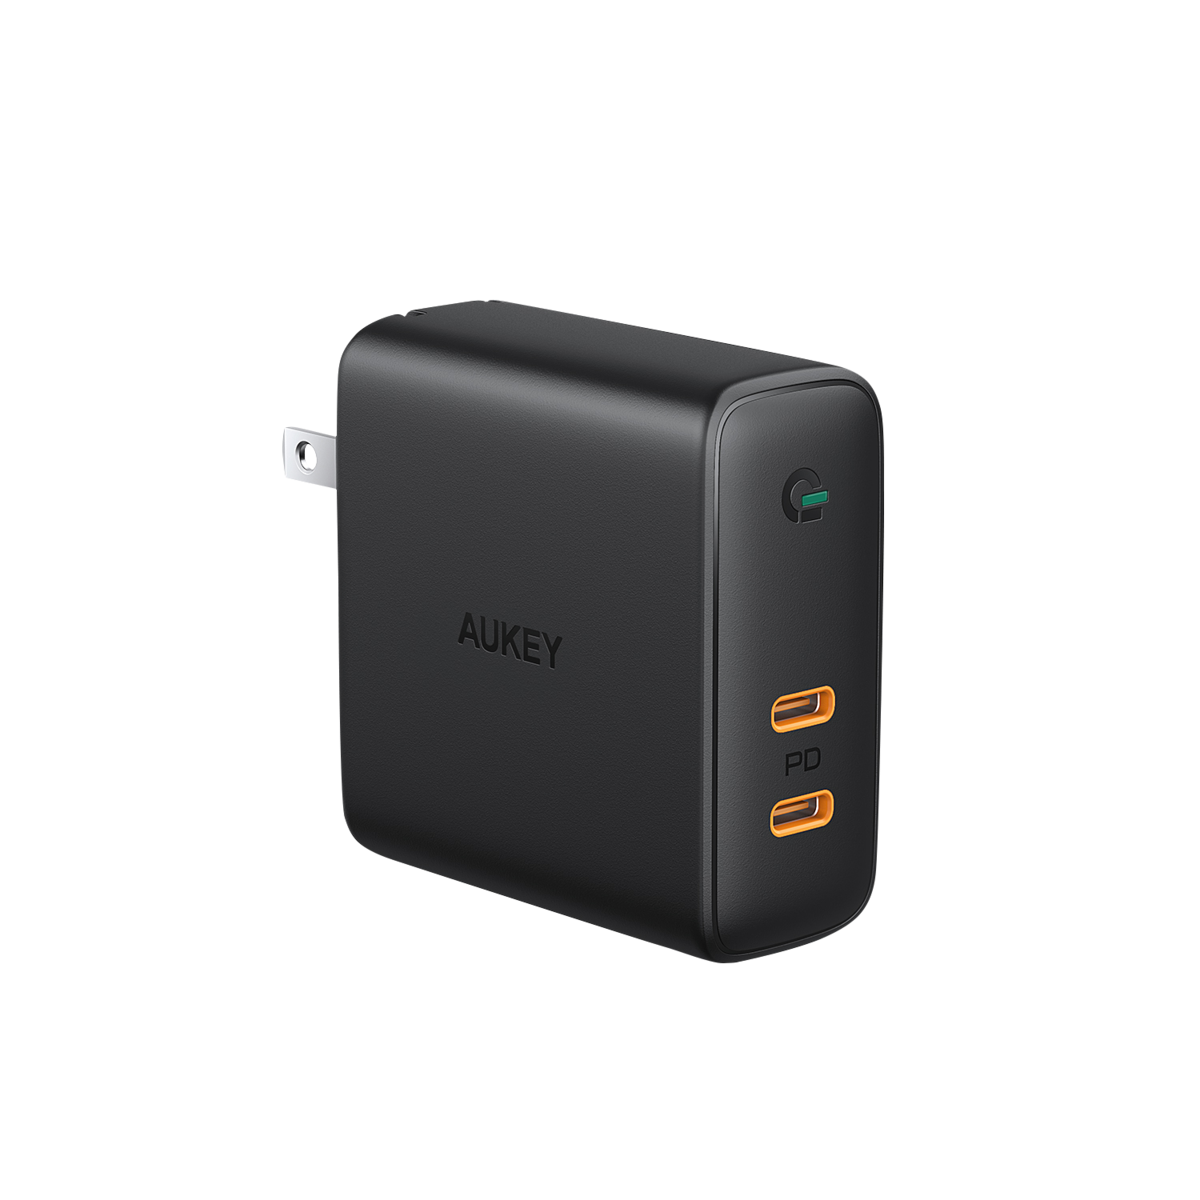 USB C Charger AUKEY 63W 5-Port Fast Charger PD Wall Charger with 45W Power Delivery 3.0 & Quick Charge 3.0 for iPhone 11 Pro Max/SE Galaxy S10 AirPods Pro Pixel 4XL MacBook Pro Switch iPad Pro 